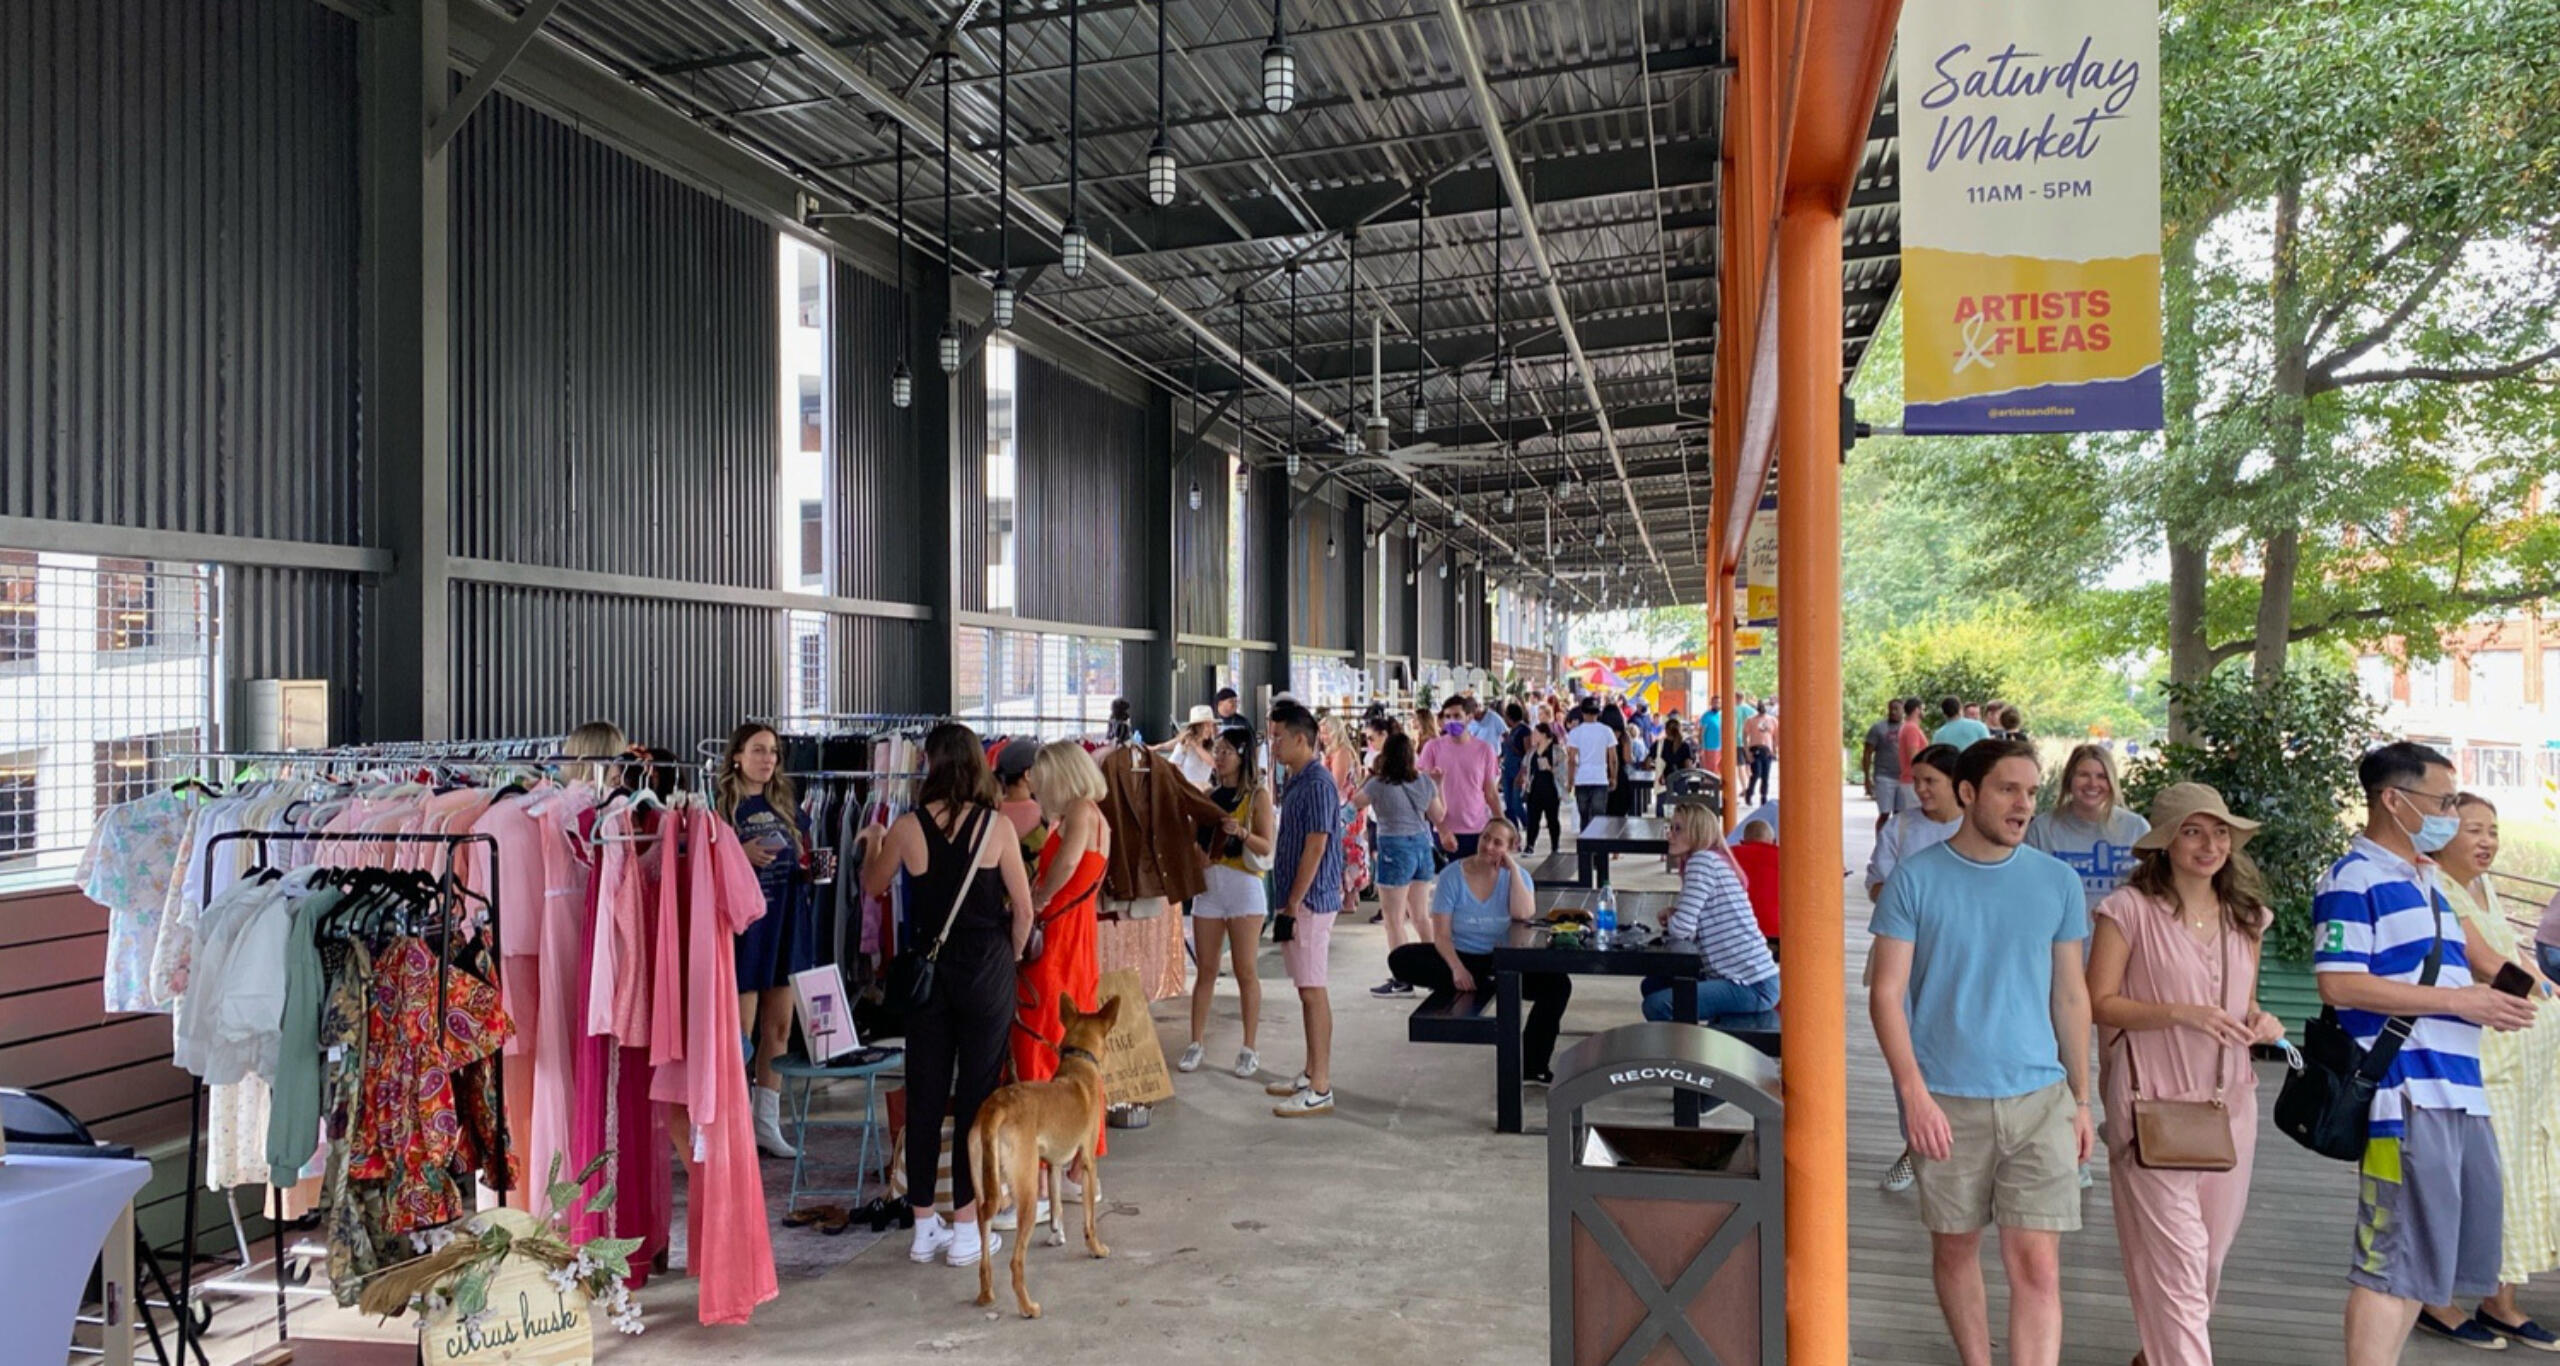 People shopping at the Artists & Fleas event in The Shed at Ponce City Market